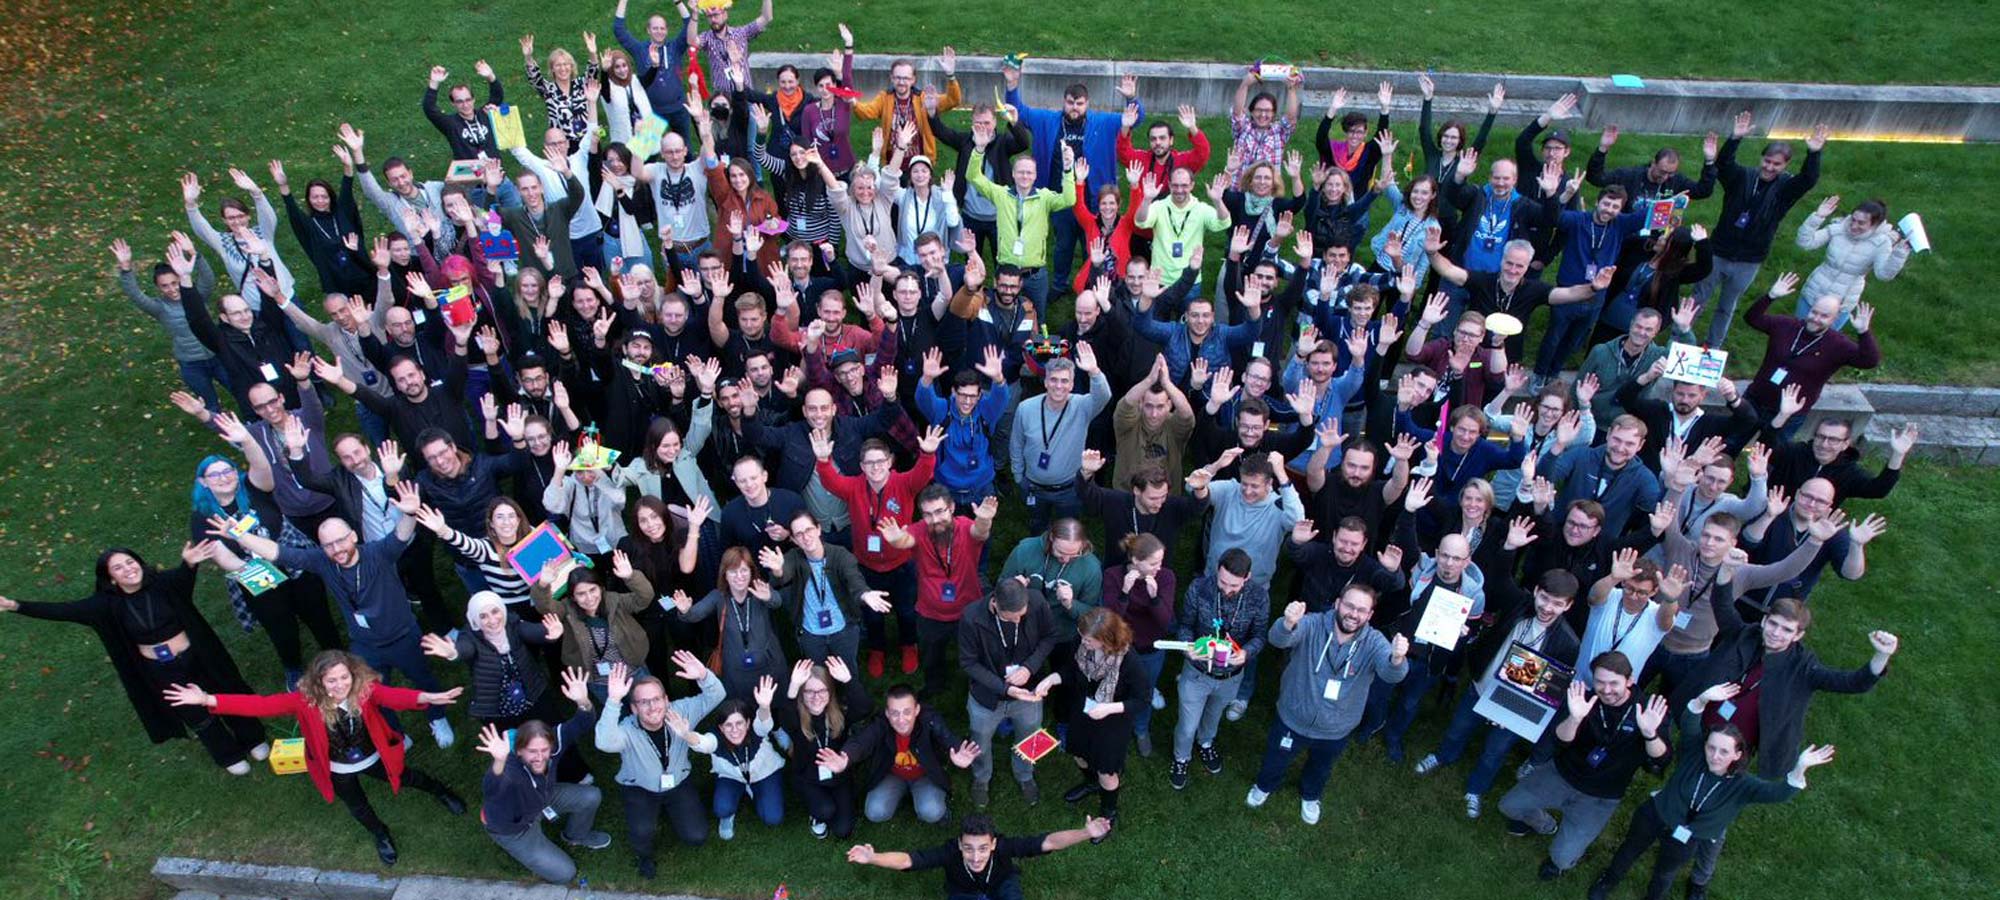 Drone group photo from the company attendees